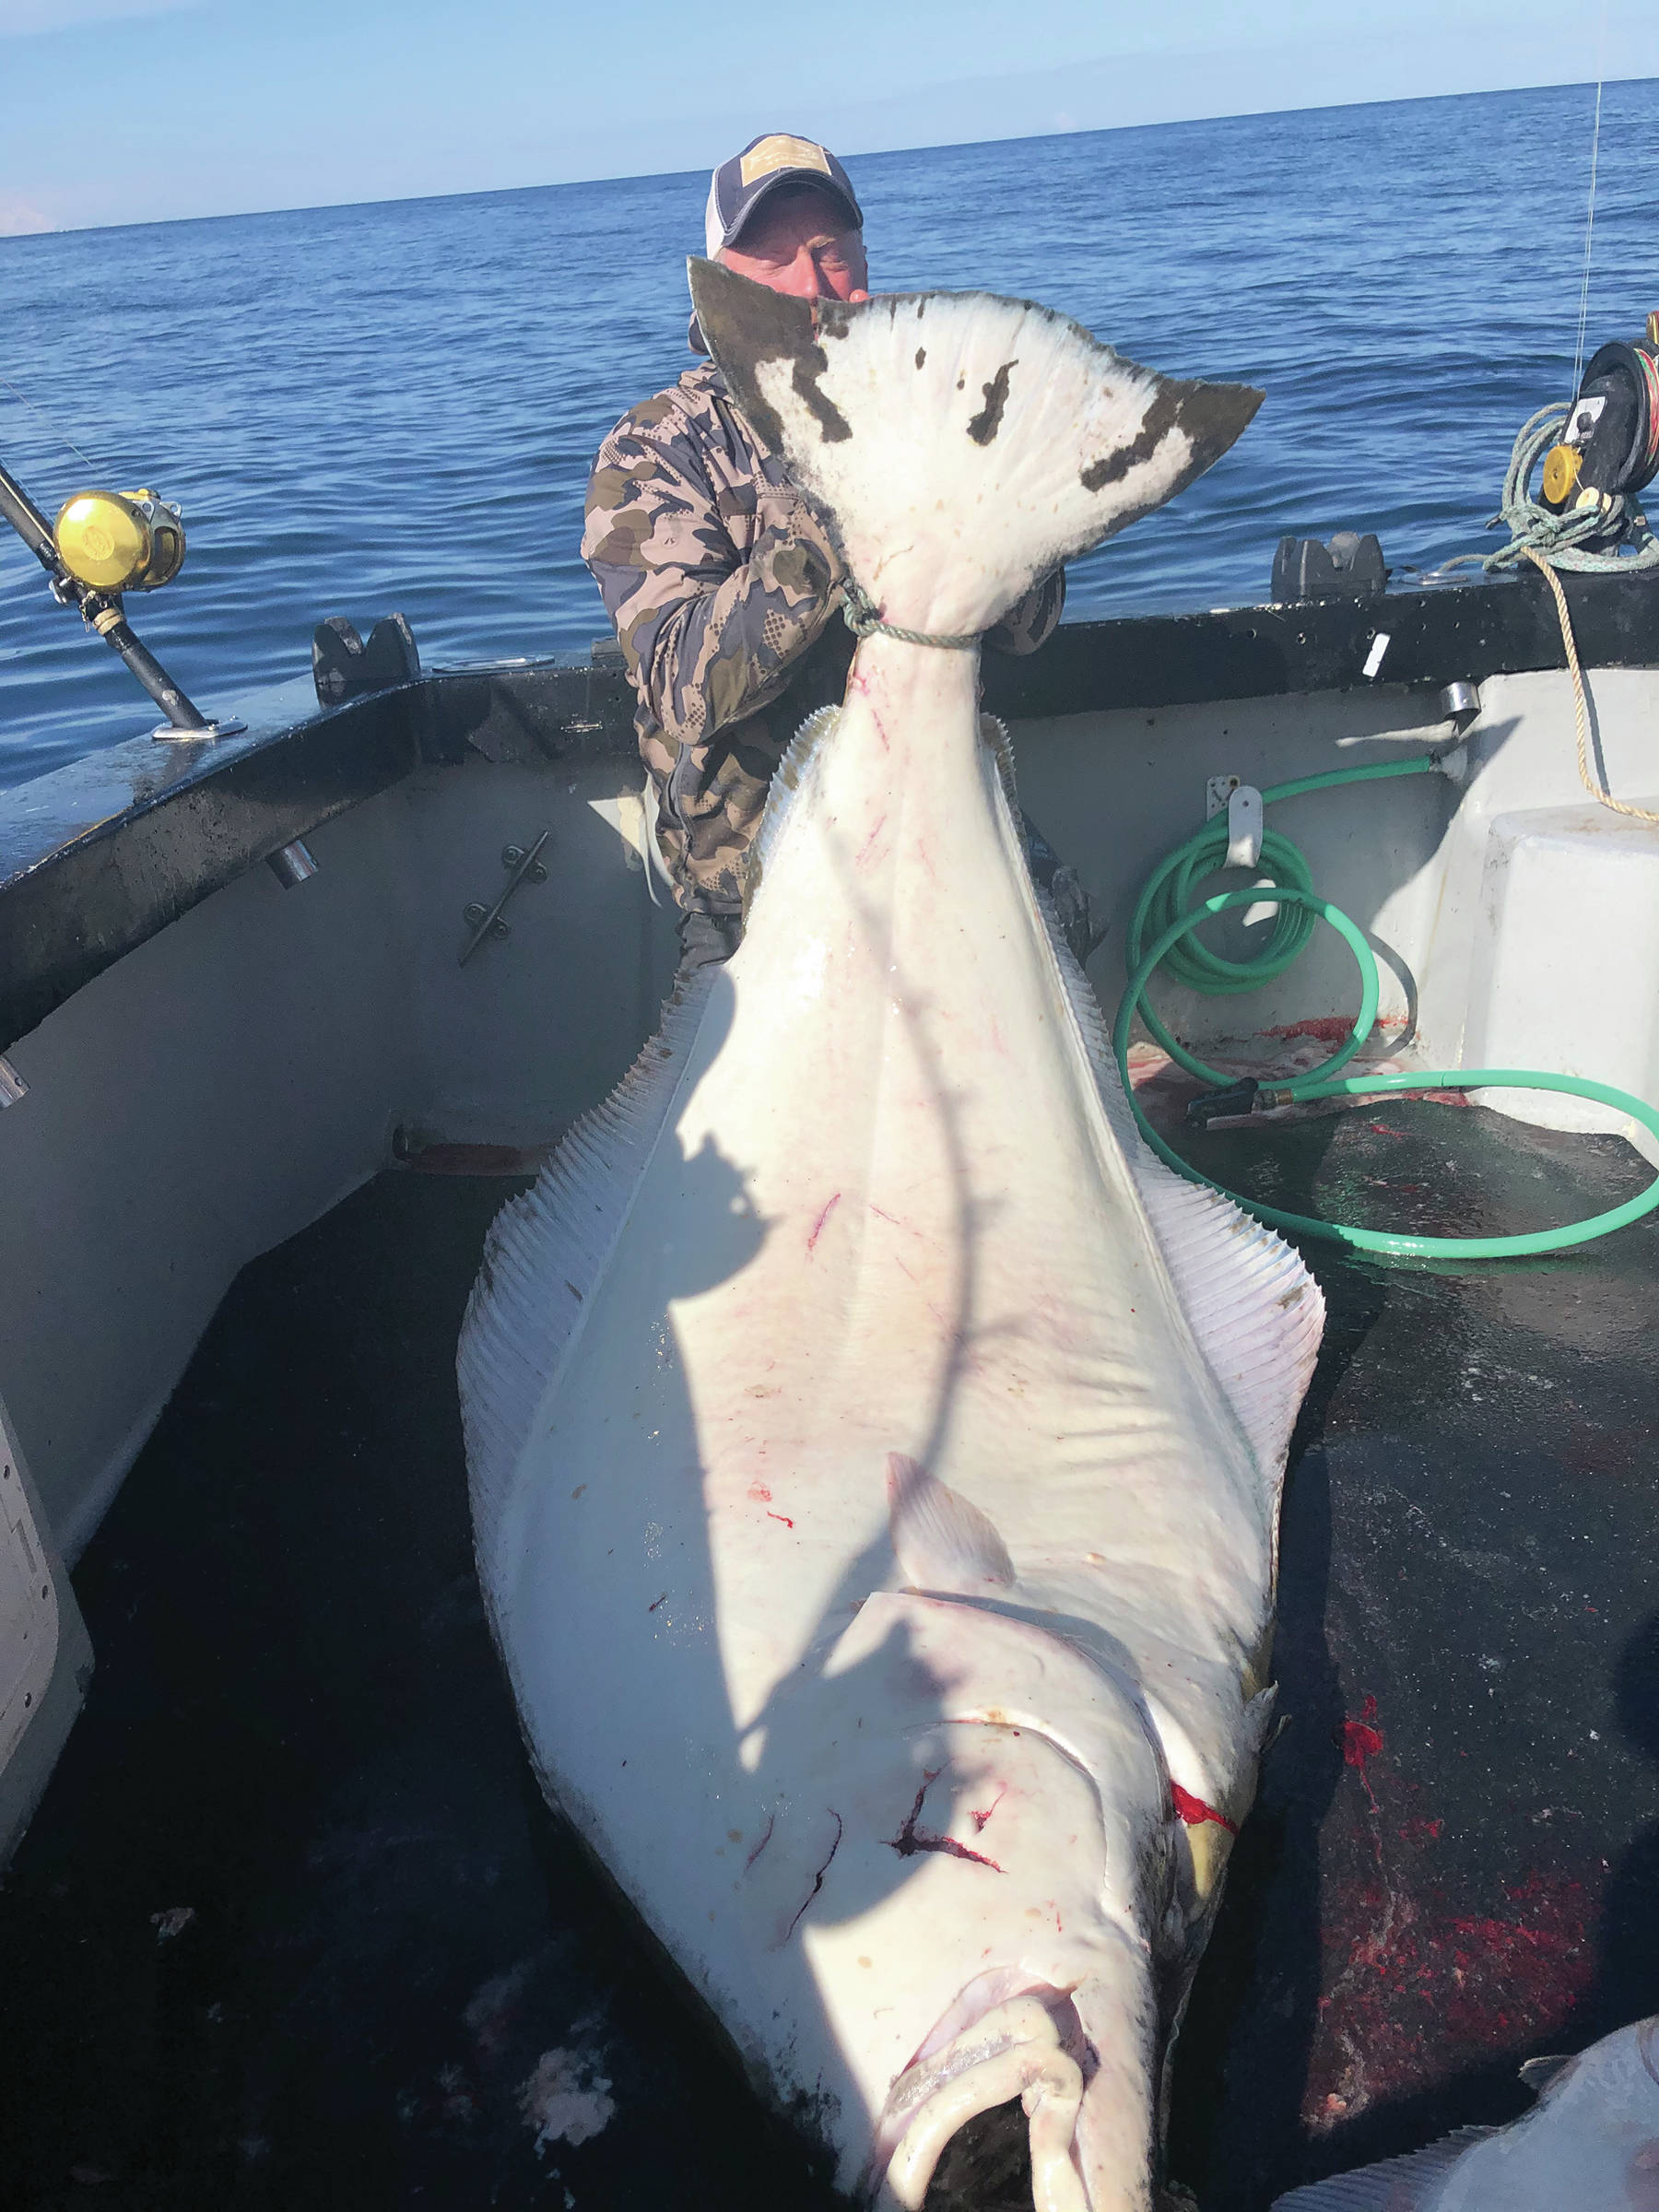 Chris Giegerich holds a monster halibut he caught on the F/V Huntress with Capt. Josh Brooks on May 3, 2020, while fishing in lower Cook Inlet, Alaska, with his family. (Photo courtesy of Joleen Brooks, F/V Huntress)